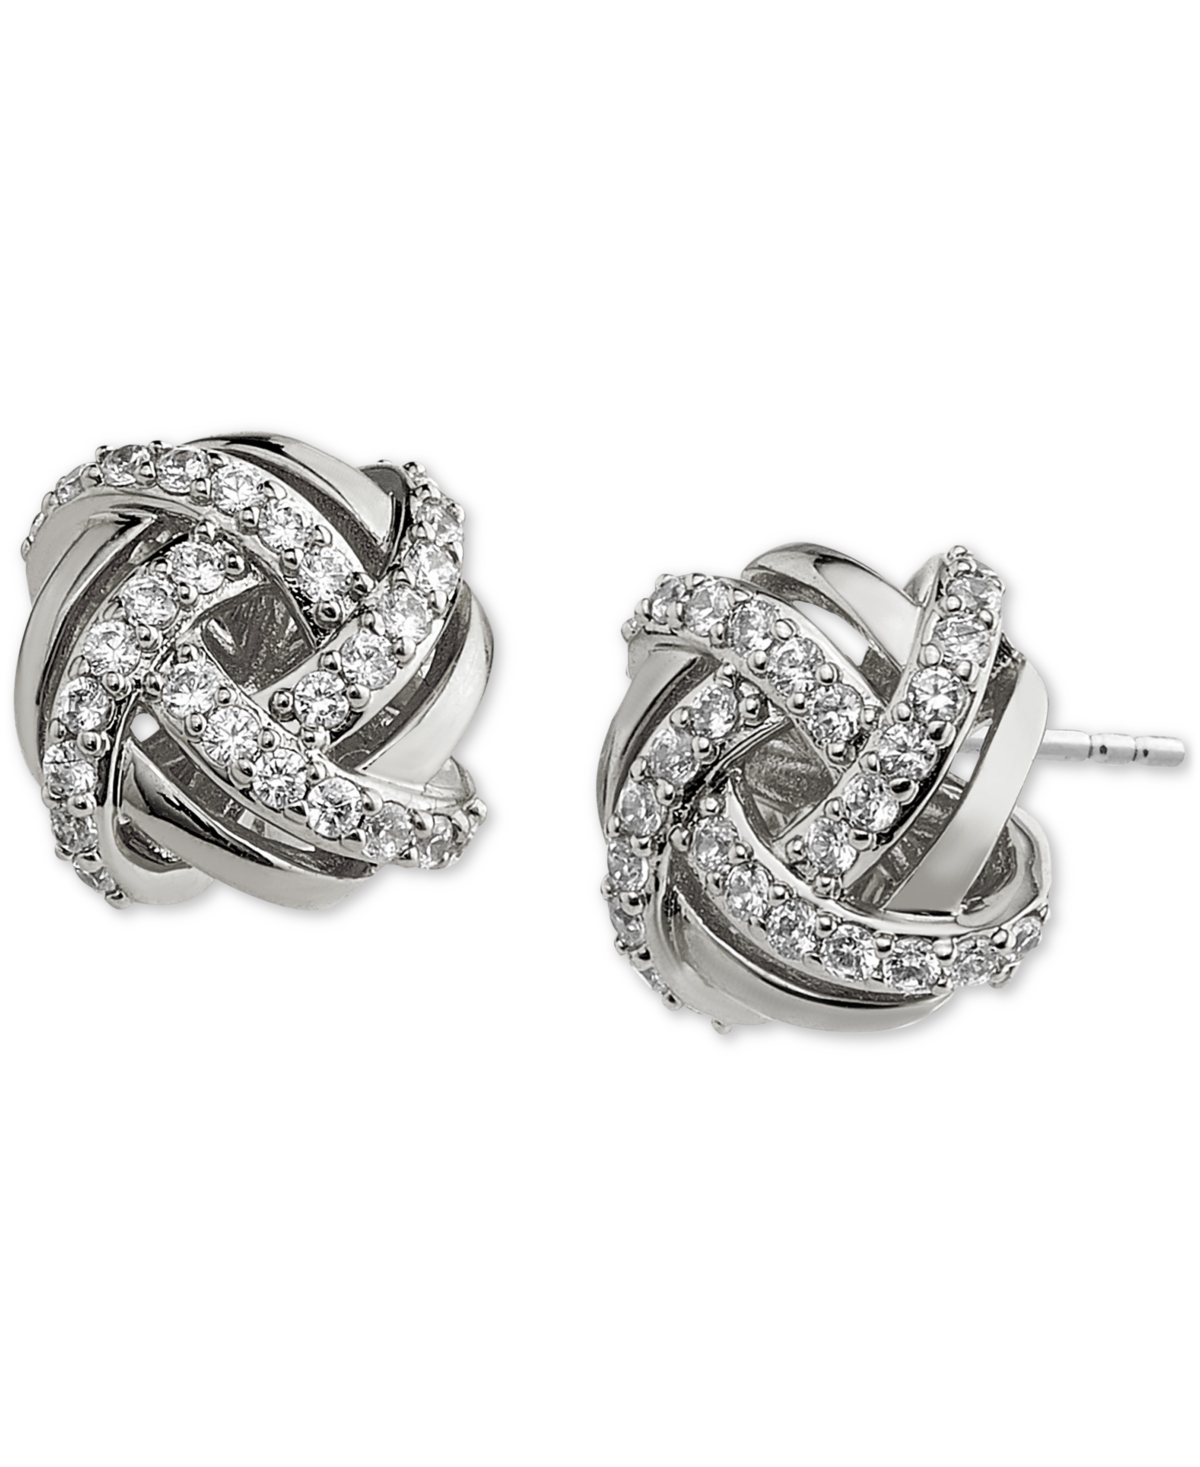 Pave Knot Stud Earrings, Created for Macy's - Silver